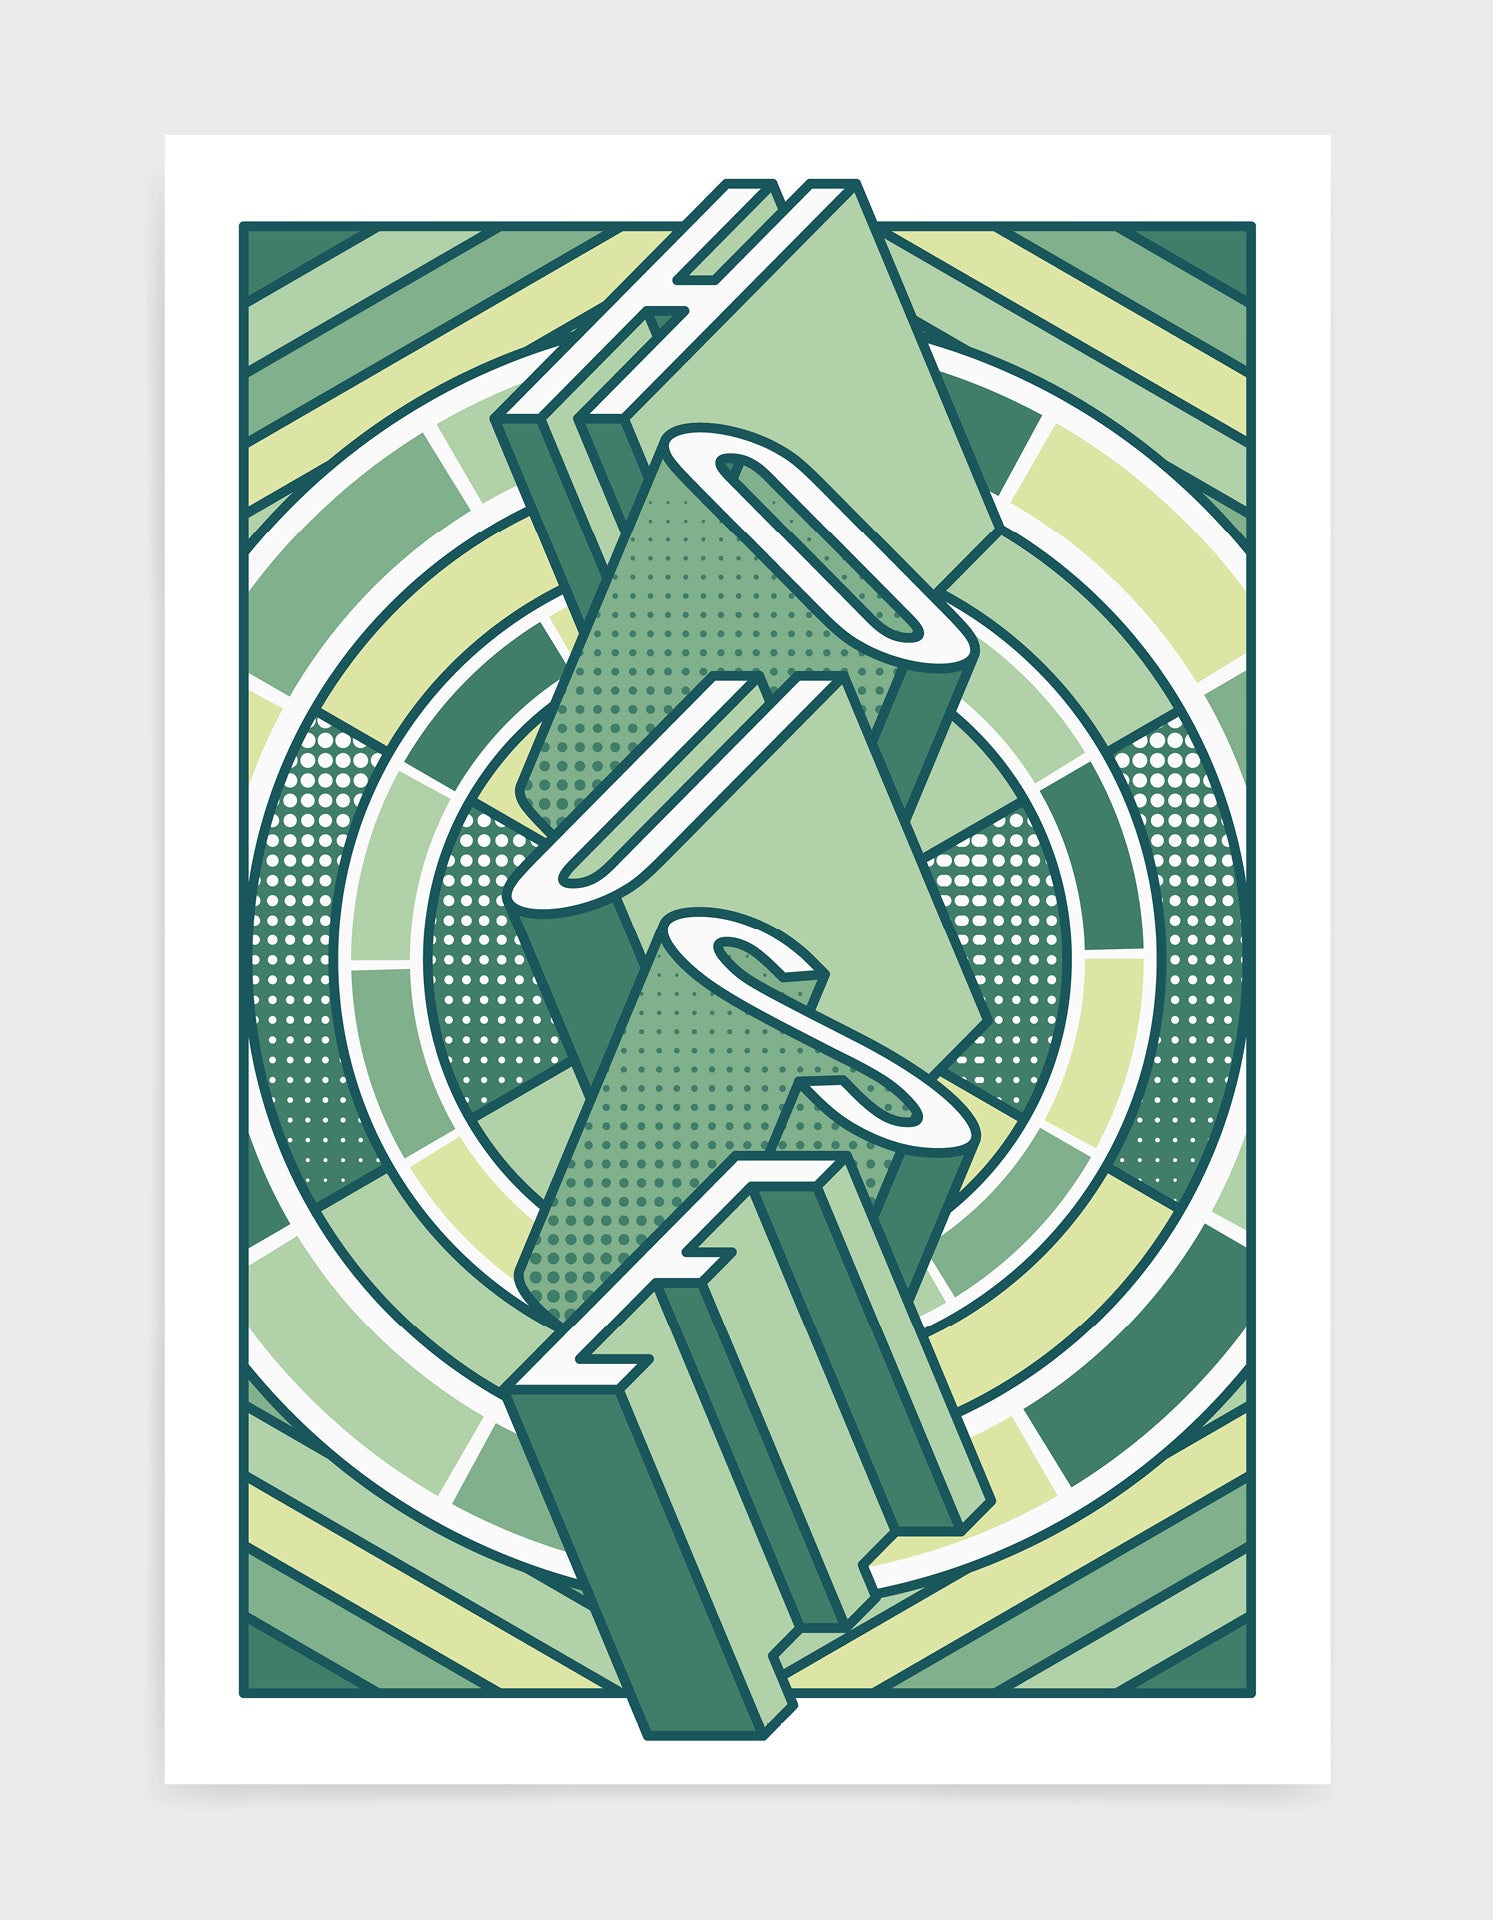 house music art print featuring a geometric abstract pattern in bold shapes and green tone colours. Block typography depicts the word House in tumbling text